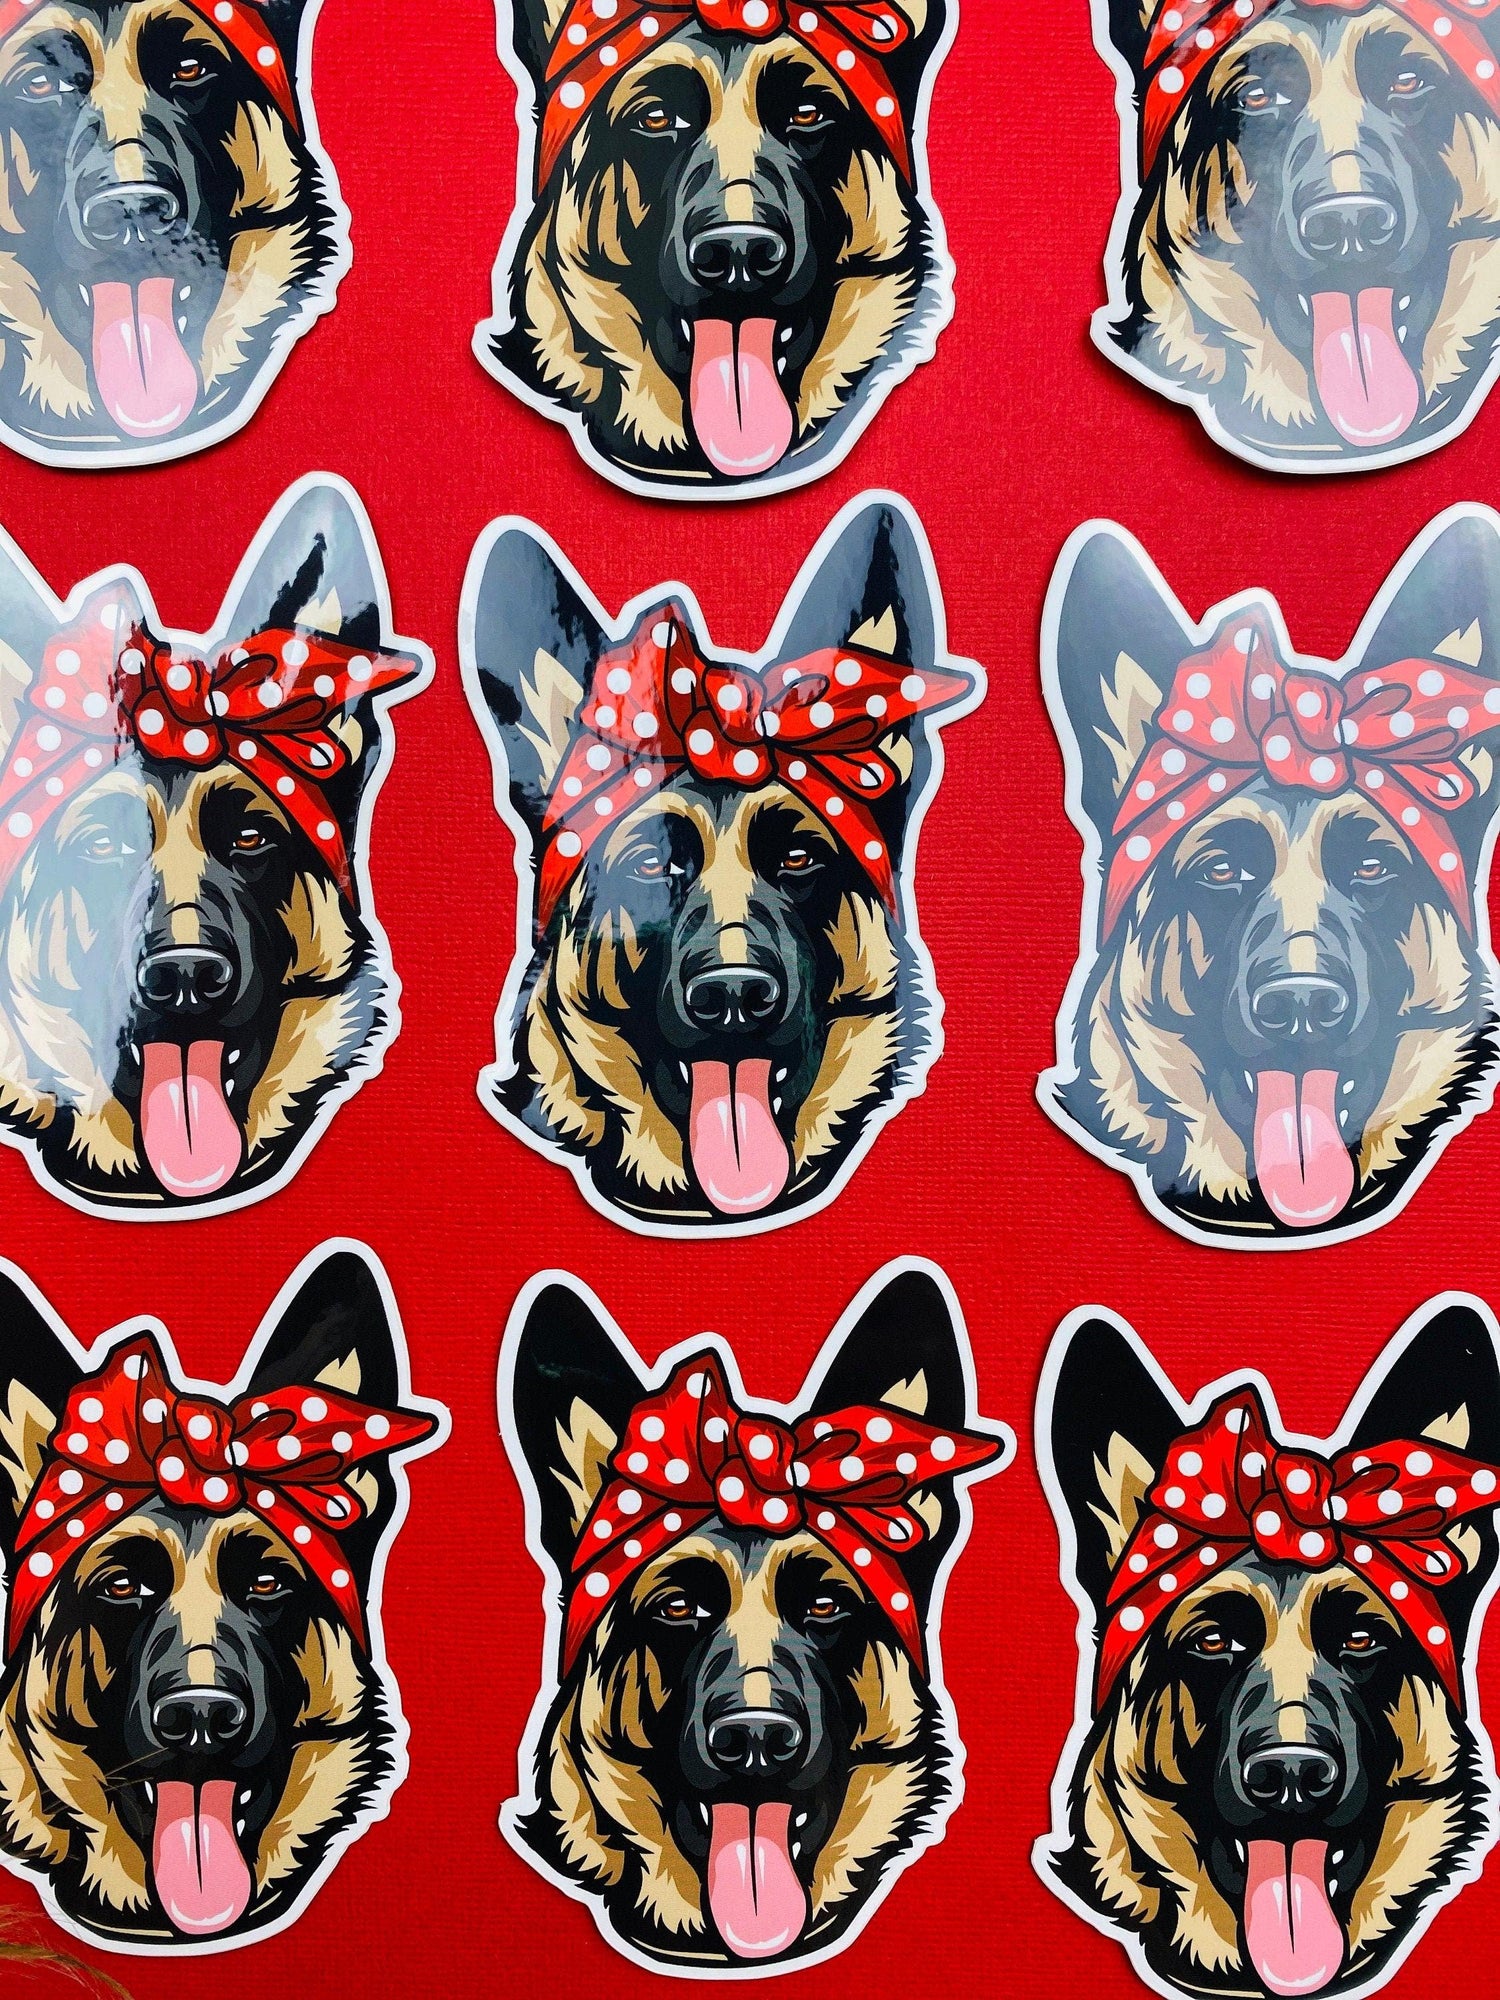 German Shepherd Sticker Red Polka Dot Bow Bandana Cute GSD Dog Decal for Car, Hydroflask, Gifts Under 5 for GSD Shepherd Mom Owner - Ottos Grotto :: Stickers For Your Stuff